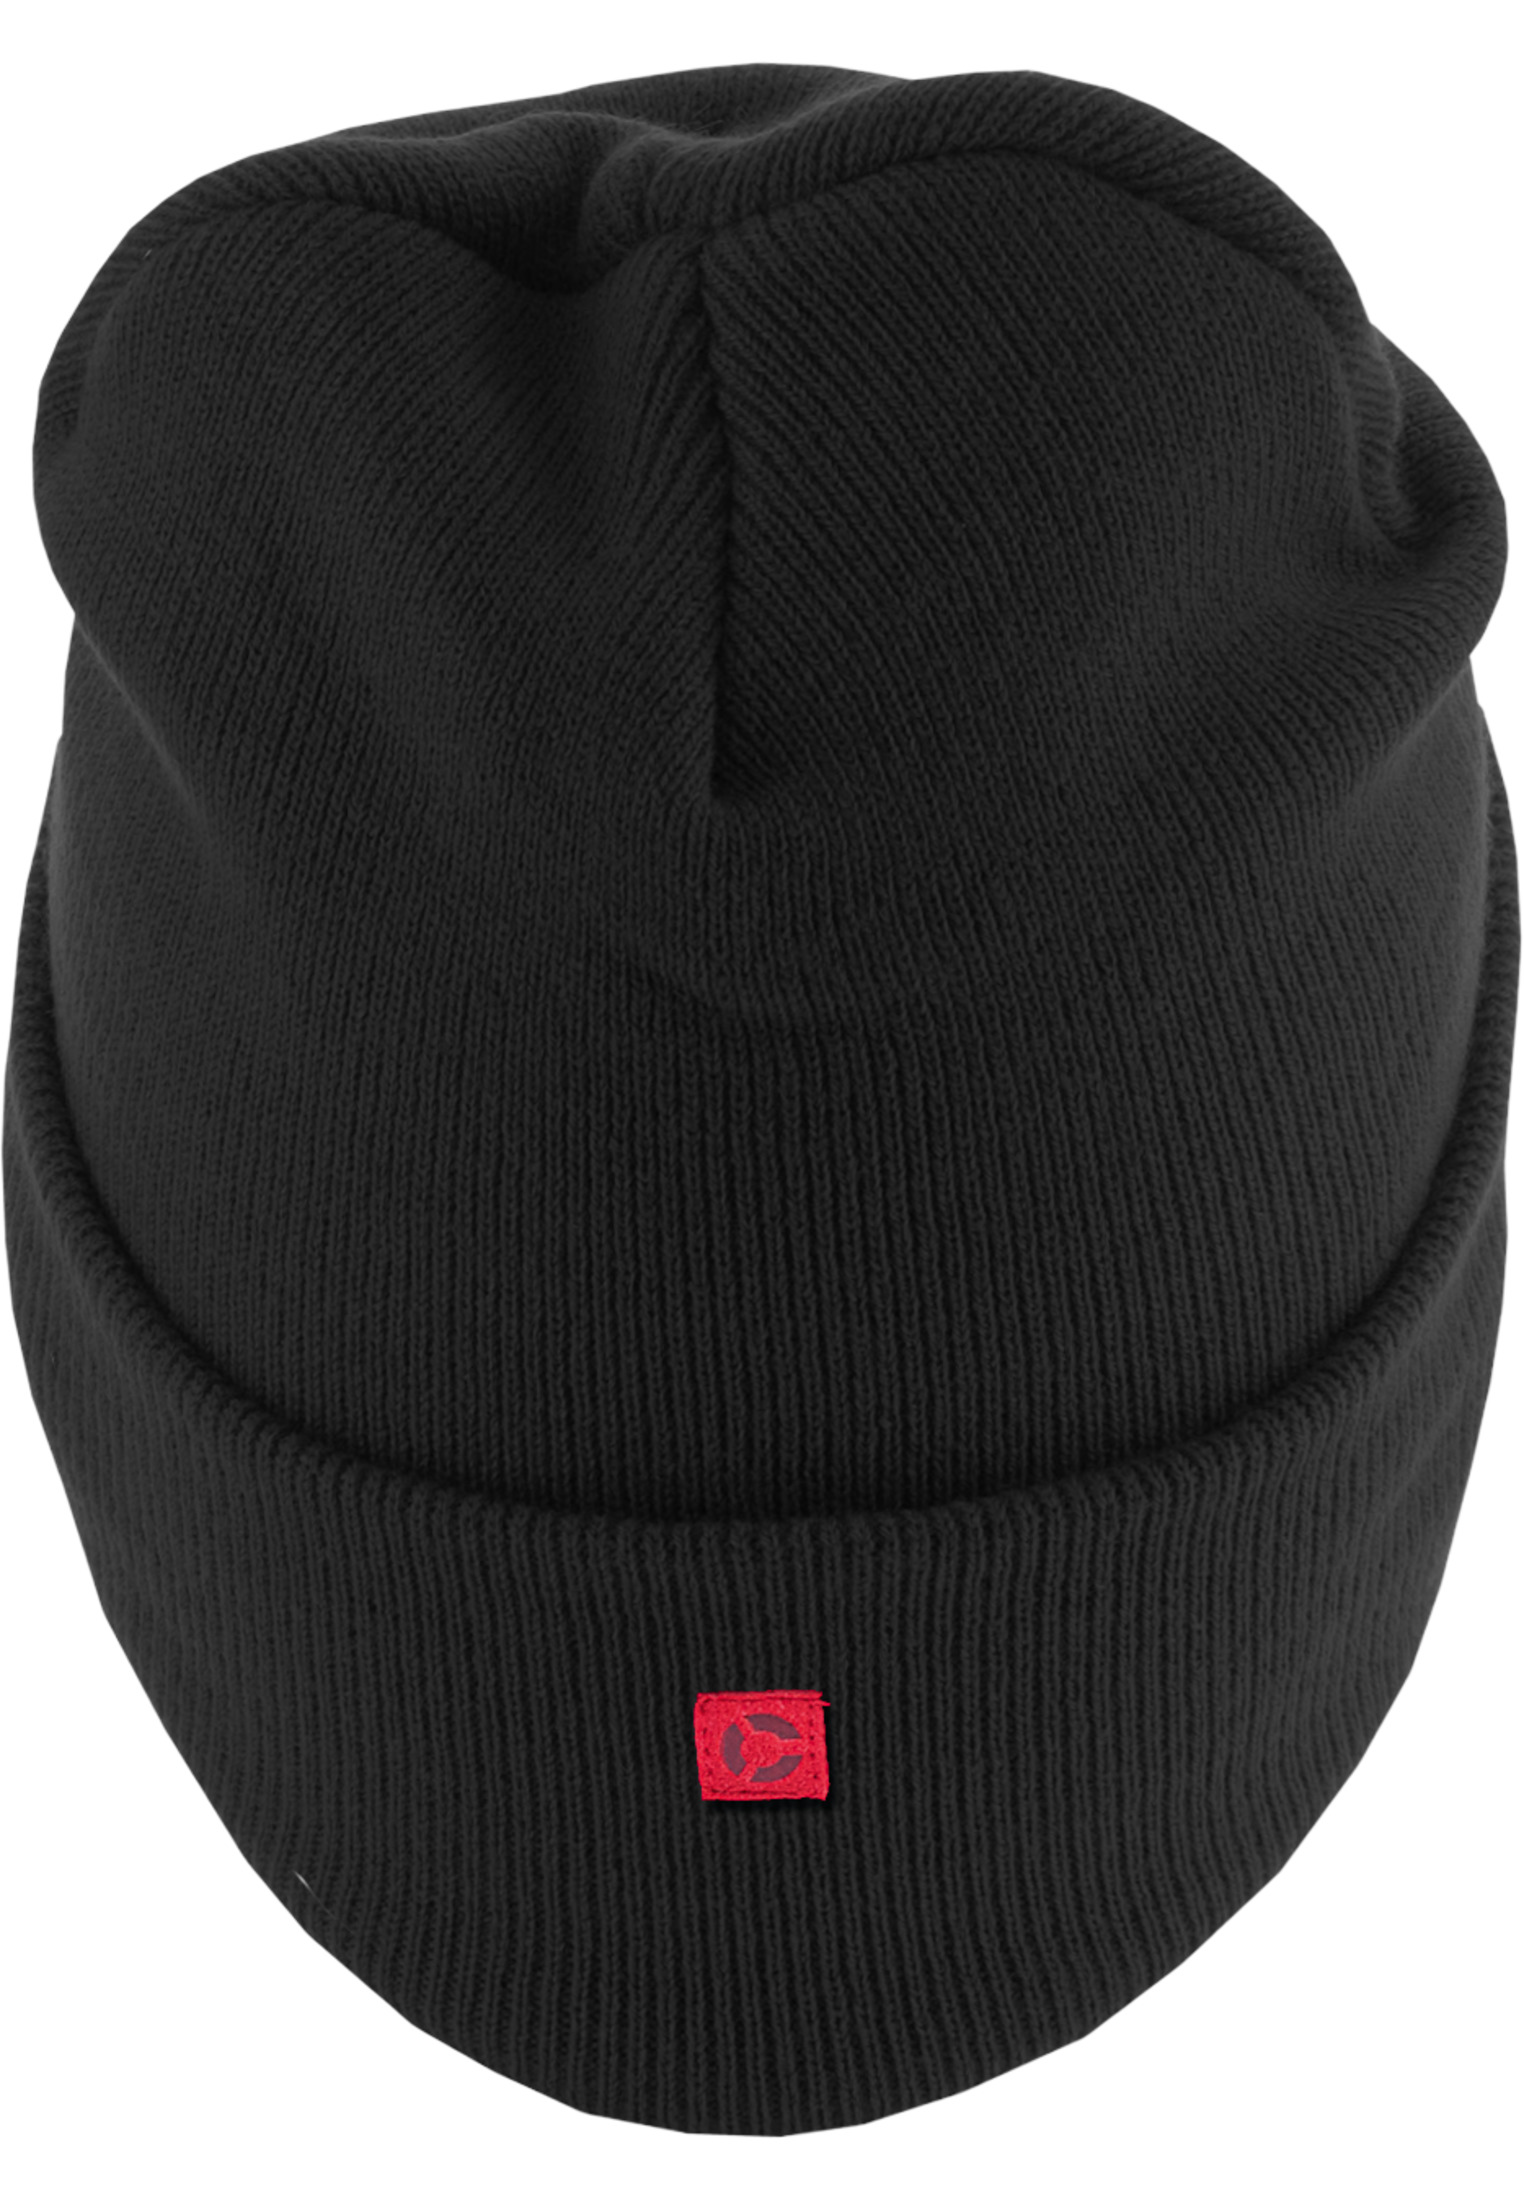 Caps & Beanies Letter Cuff Knit Beanie in Farbe I